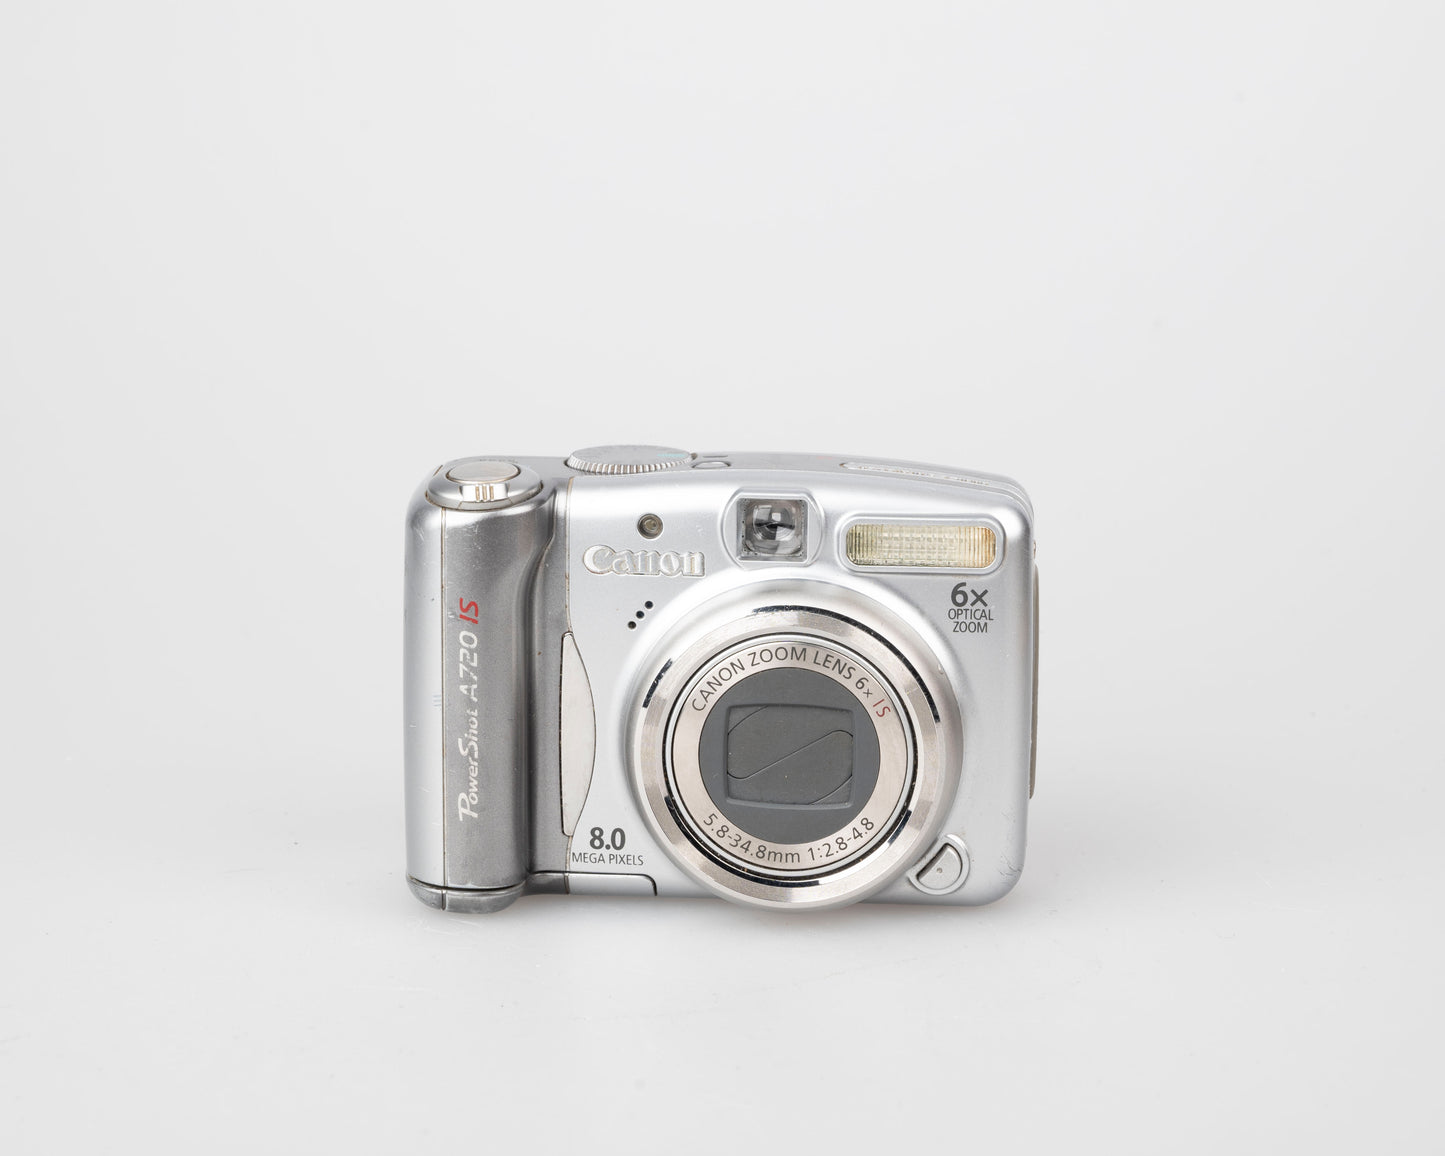 Canon Powershot A720 IS digicam w/ 8 MP CCD sensor (uses AA batteries and SD memory cards)